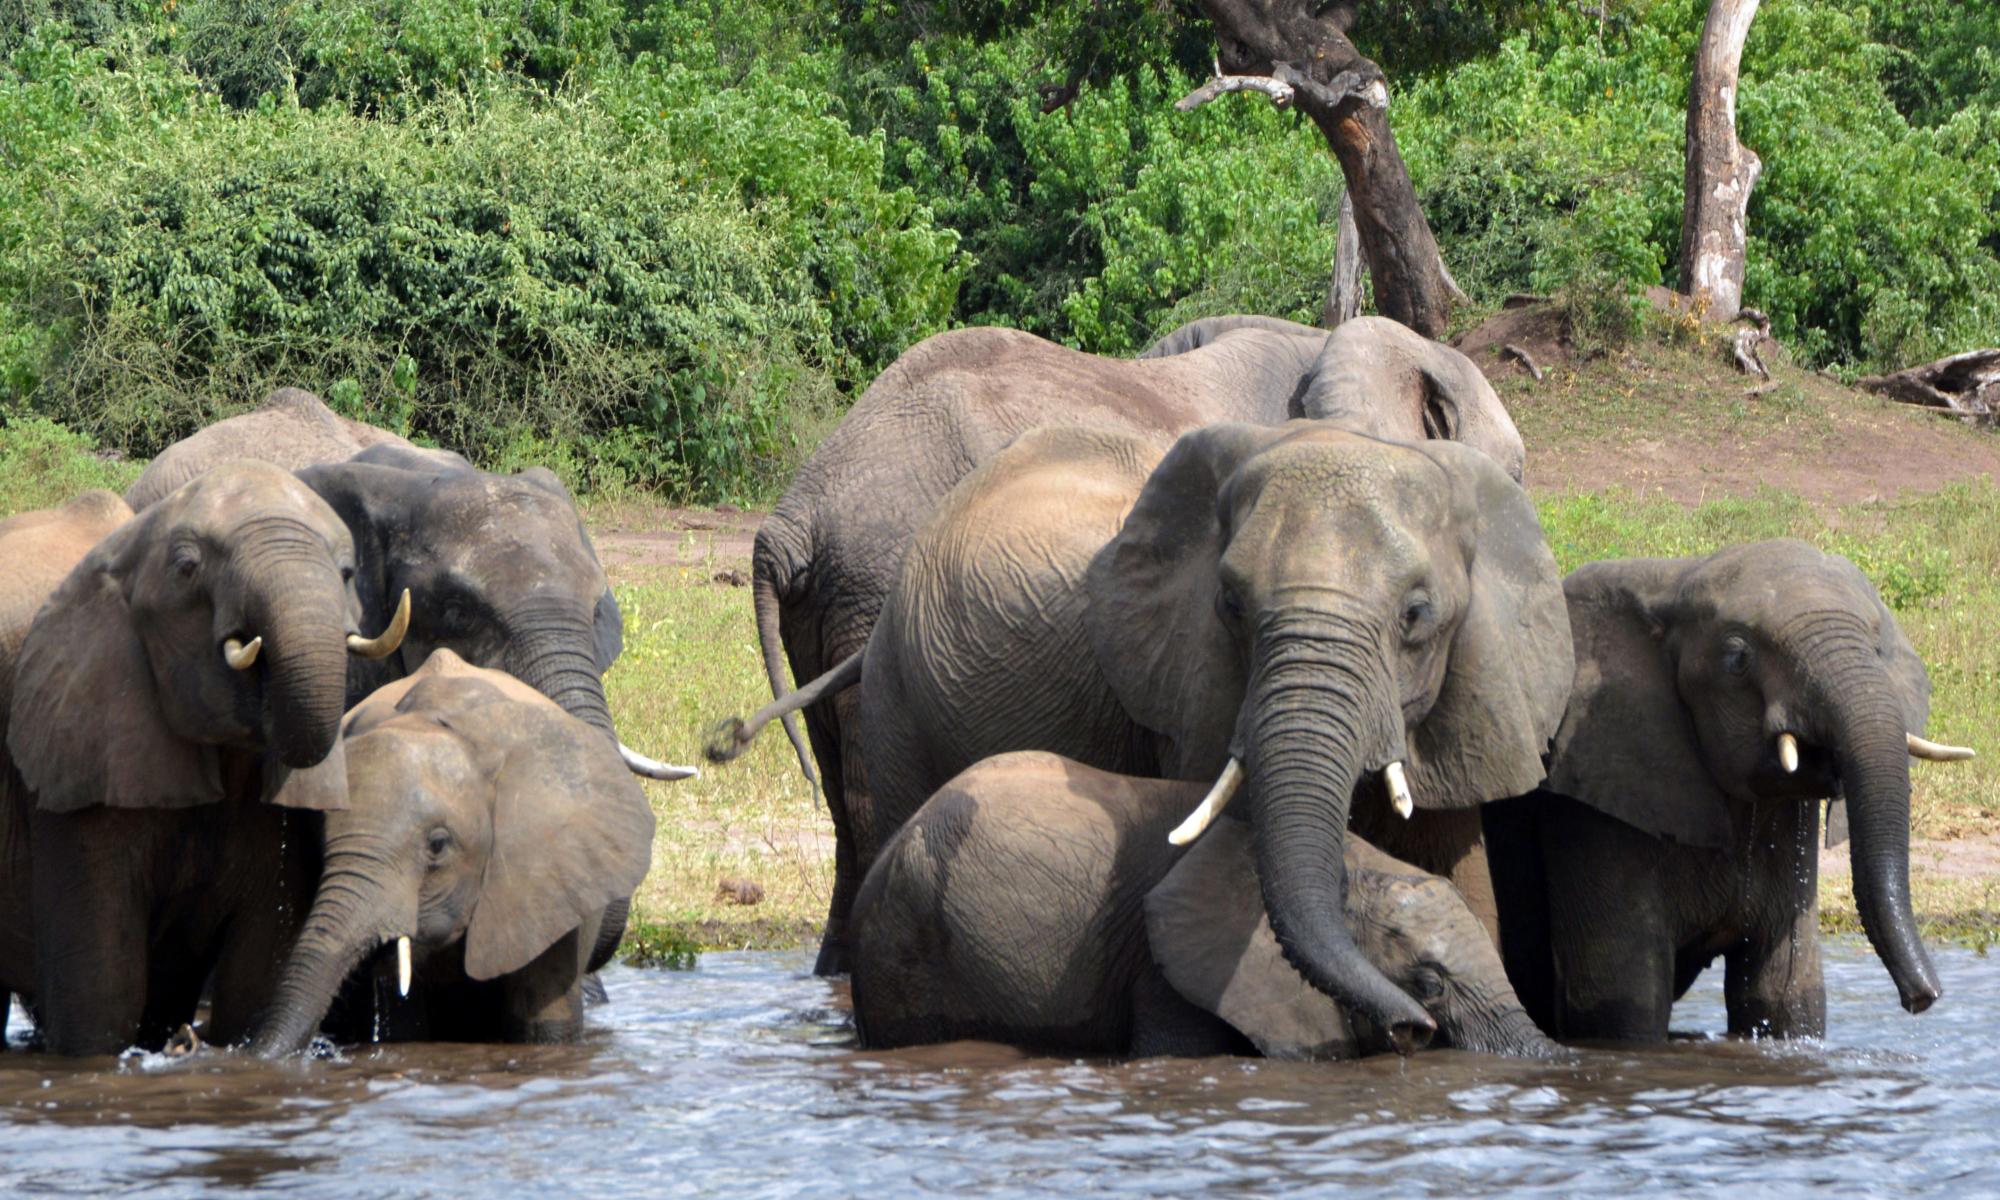 Ivory ban loophole means elephant body parts can still be traded in UK